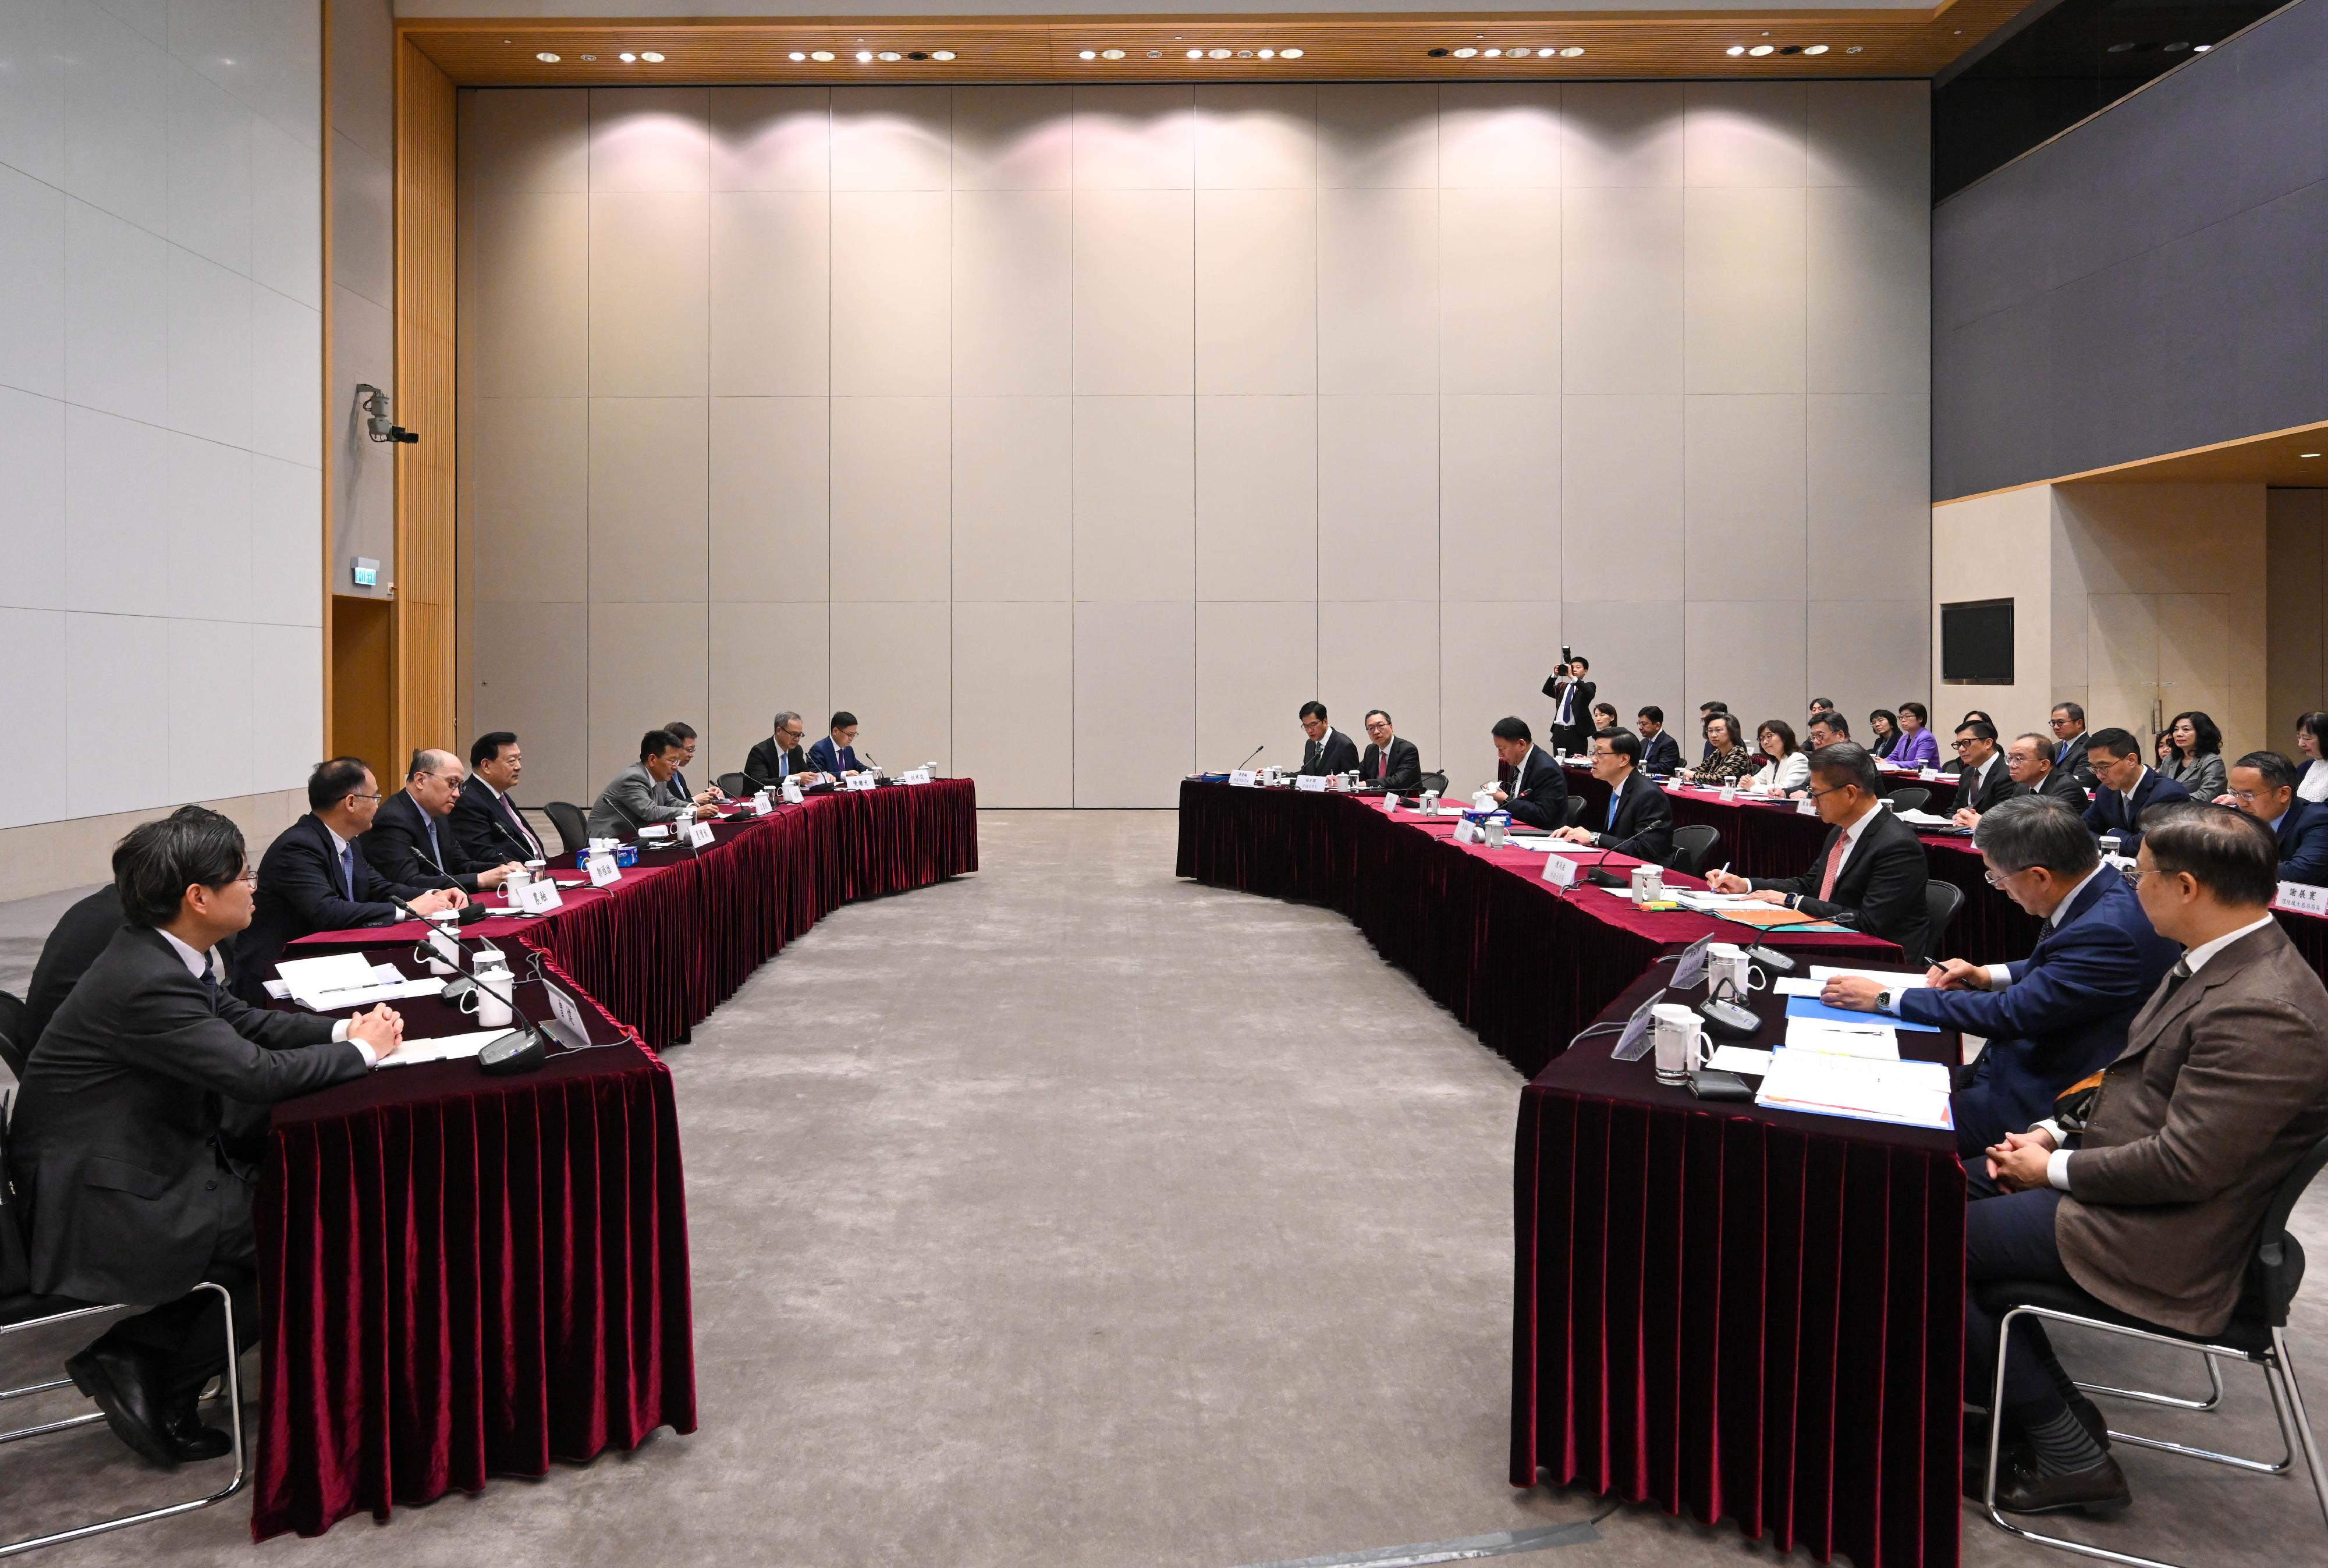 The Director of the Hong Kong and Macao Work Office of the Communist Party of China Central Committee and the Hong Kong and Macao Affairs Office of the State Council, Mr Xia Baolong, arrived in Hong Kong for his seven-day inspection visit today (February 22). Photo shows Mr Xia having an engagement session with Principal Officials and Permanent Secretaries of the Hong Kong Special Administrative Region Government led by the Chief Executive, Mr John Lee, in the afternoon.